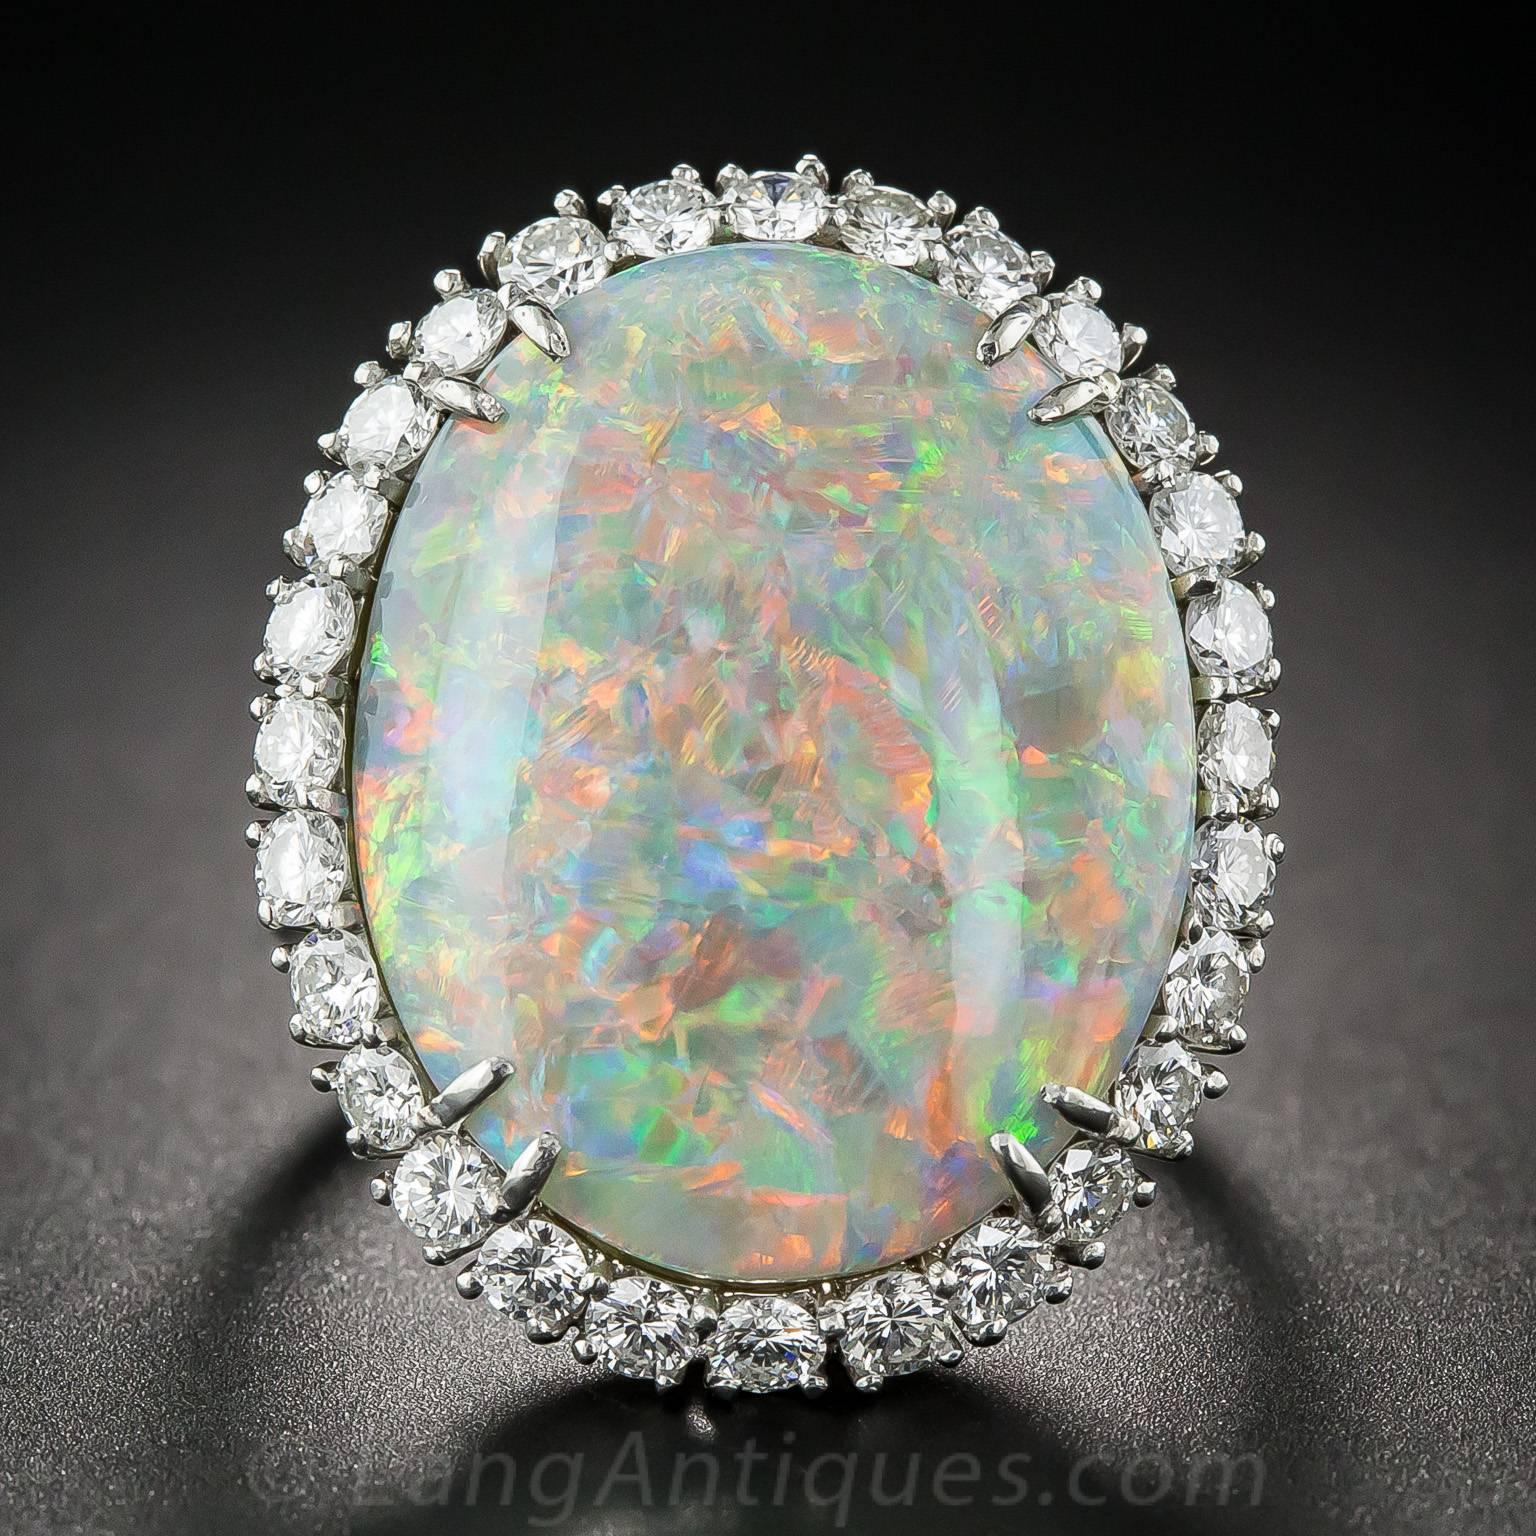 This fabulous, large-scale opal just screams "wear me, show me!" Every movement, every turn, brings out more colors and life in this enchanting and engaging gemstone. A kaleidoscopic play of color in orange and pink, yellow, blue and green